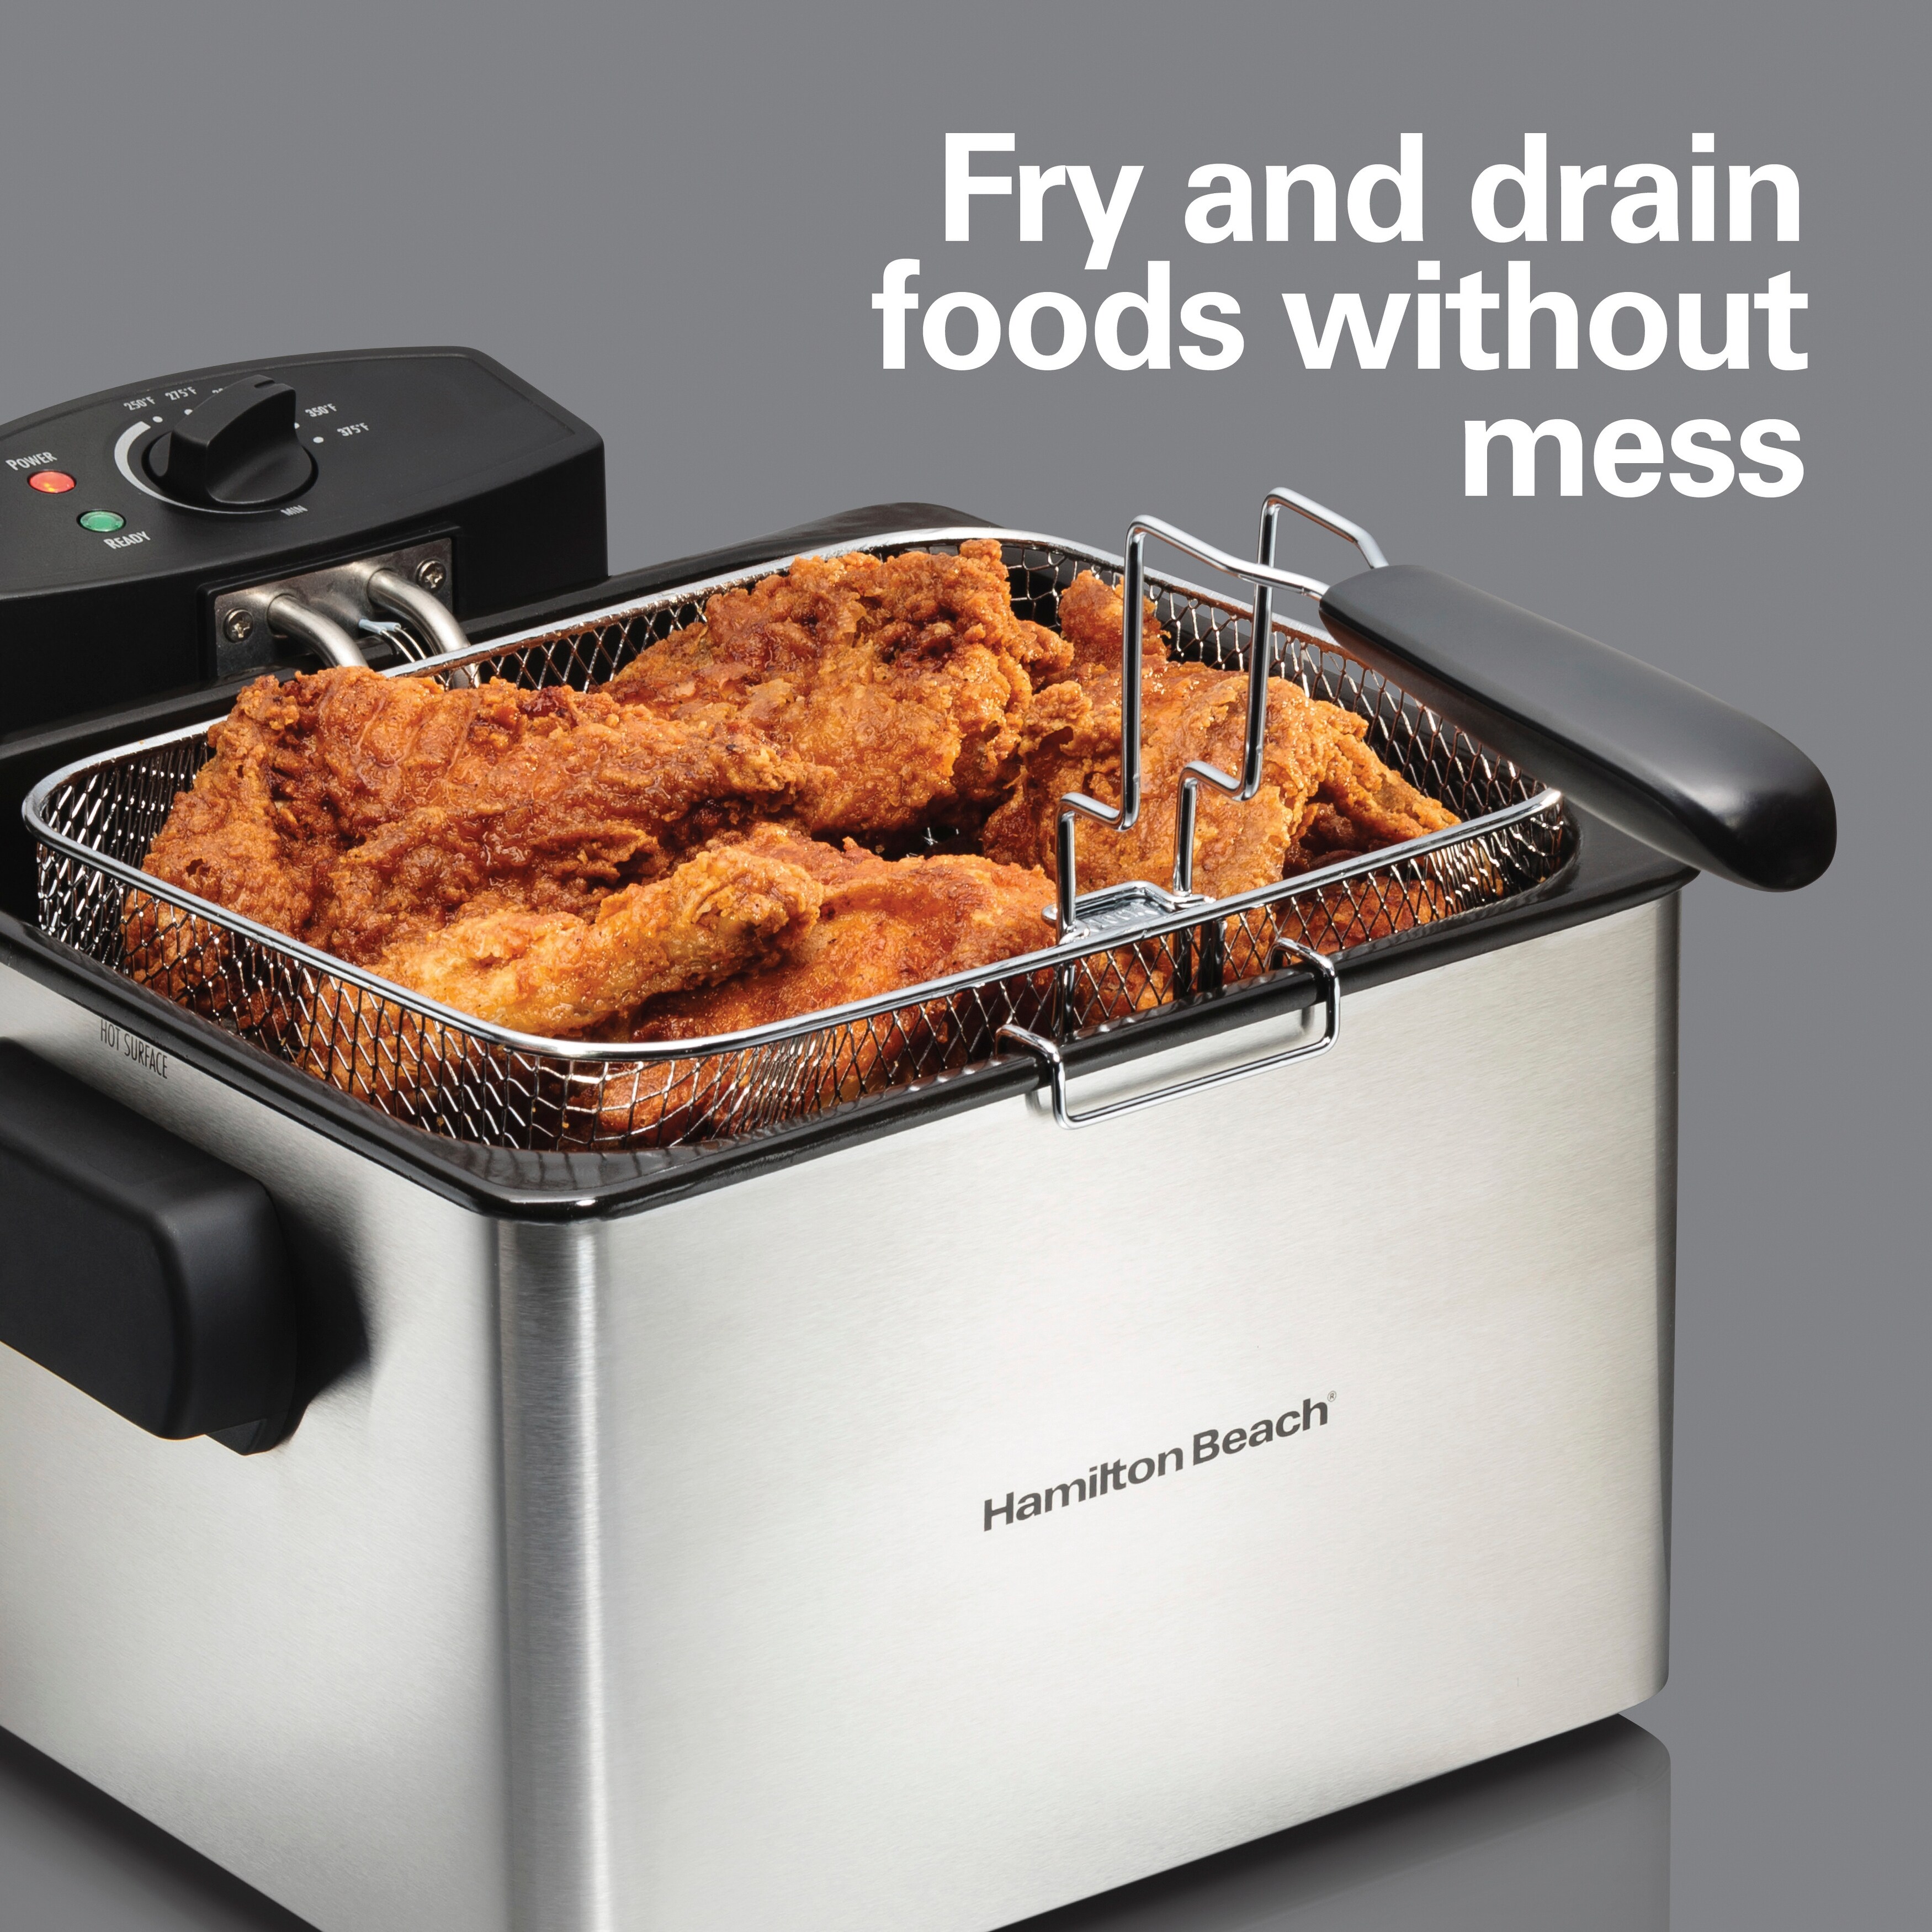 https://ak1.ostkcdn.com/images/products/is/images/direct/c6ef149ba6cace4b3644c5c3b9312f276d2b032d/Hamilton-Beach-21-Cup-Deep-Fryer.jpg